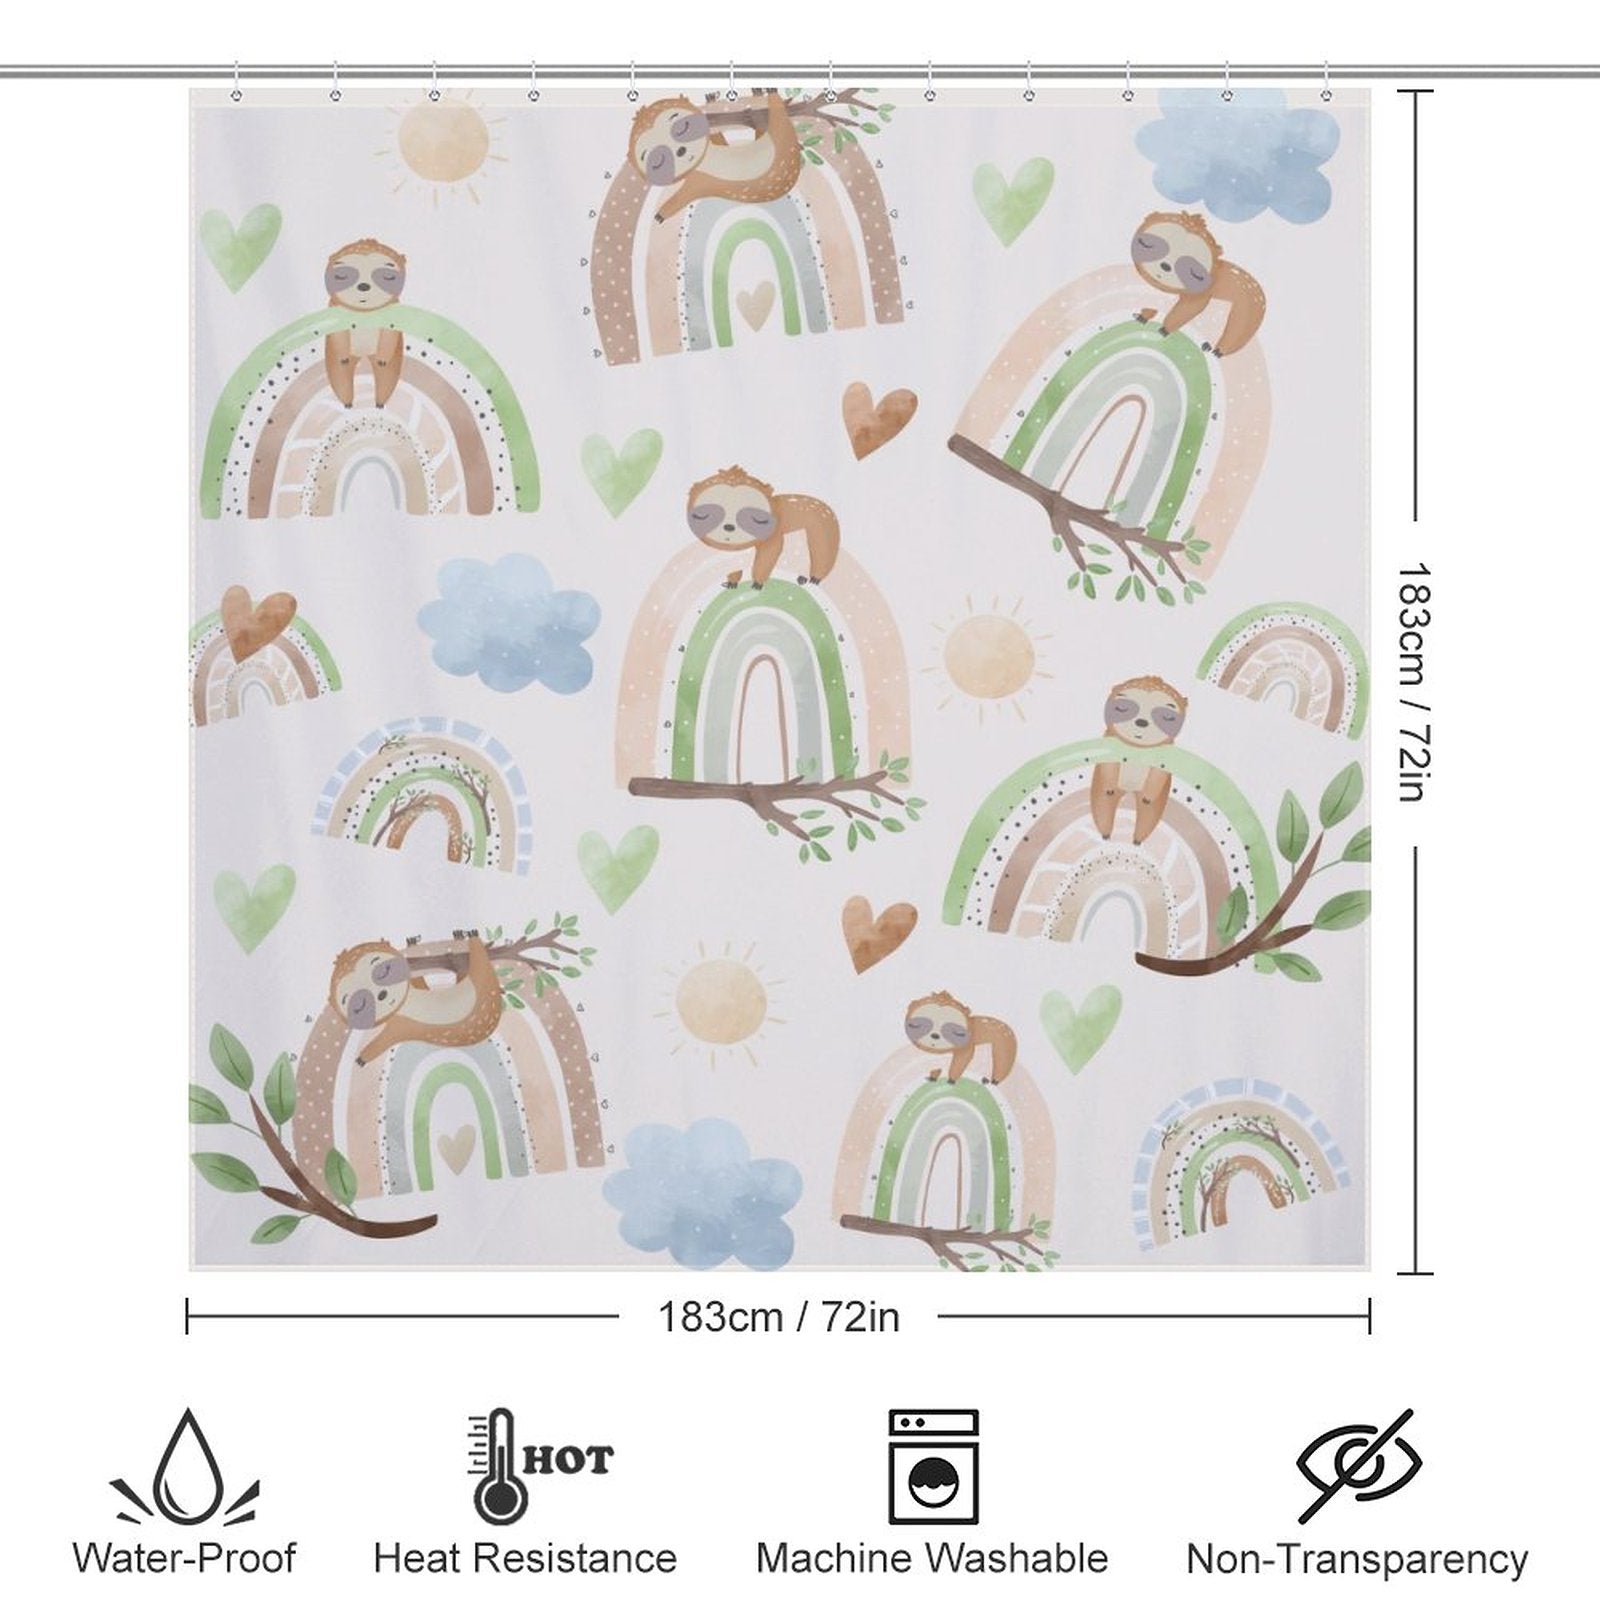 A Sloth Rainbow Shower Curtain-Cottoncat from Cotton Cat, with sloths and rainbows on it, creating a calming oasis.